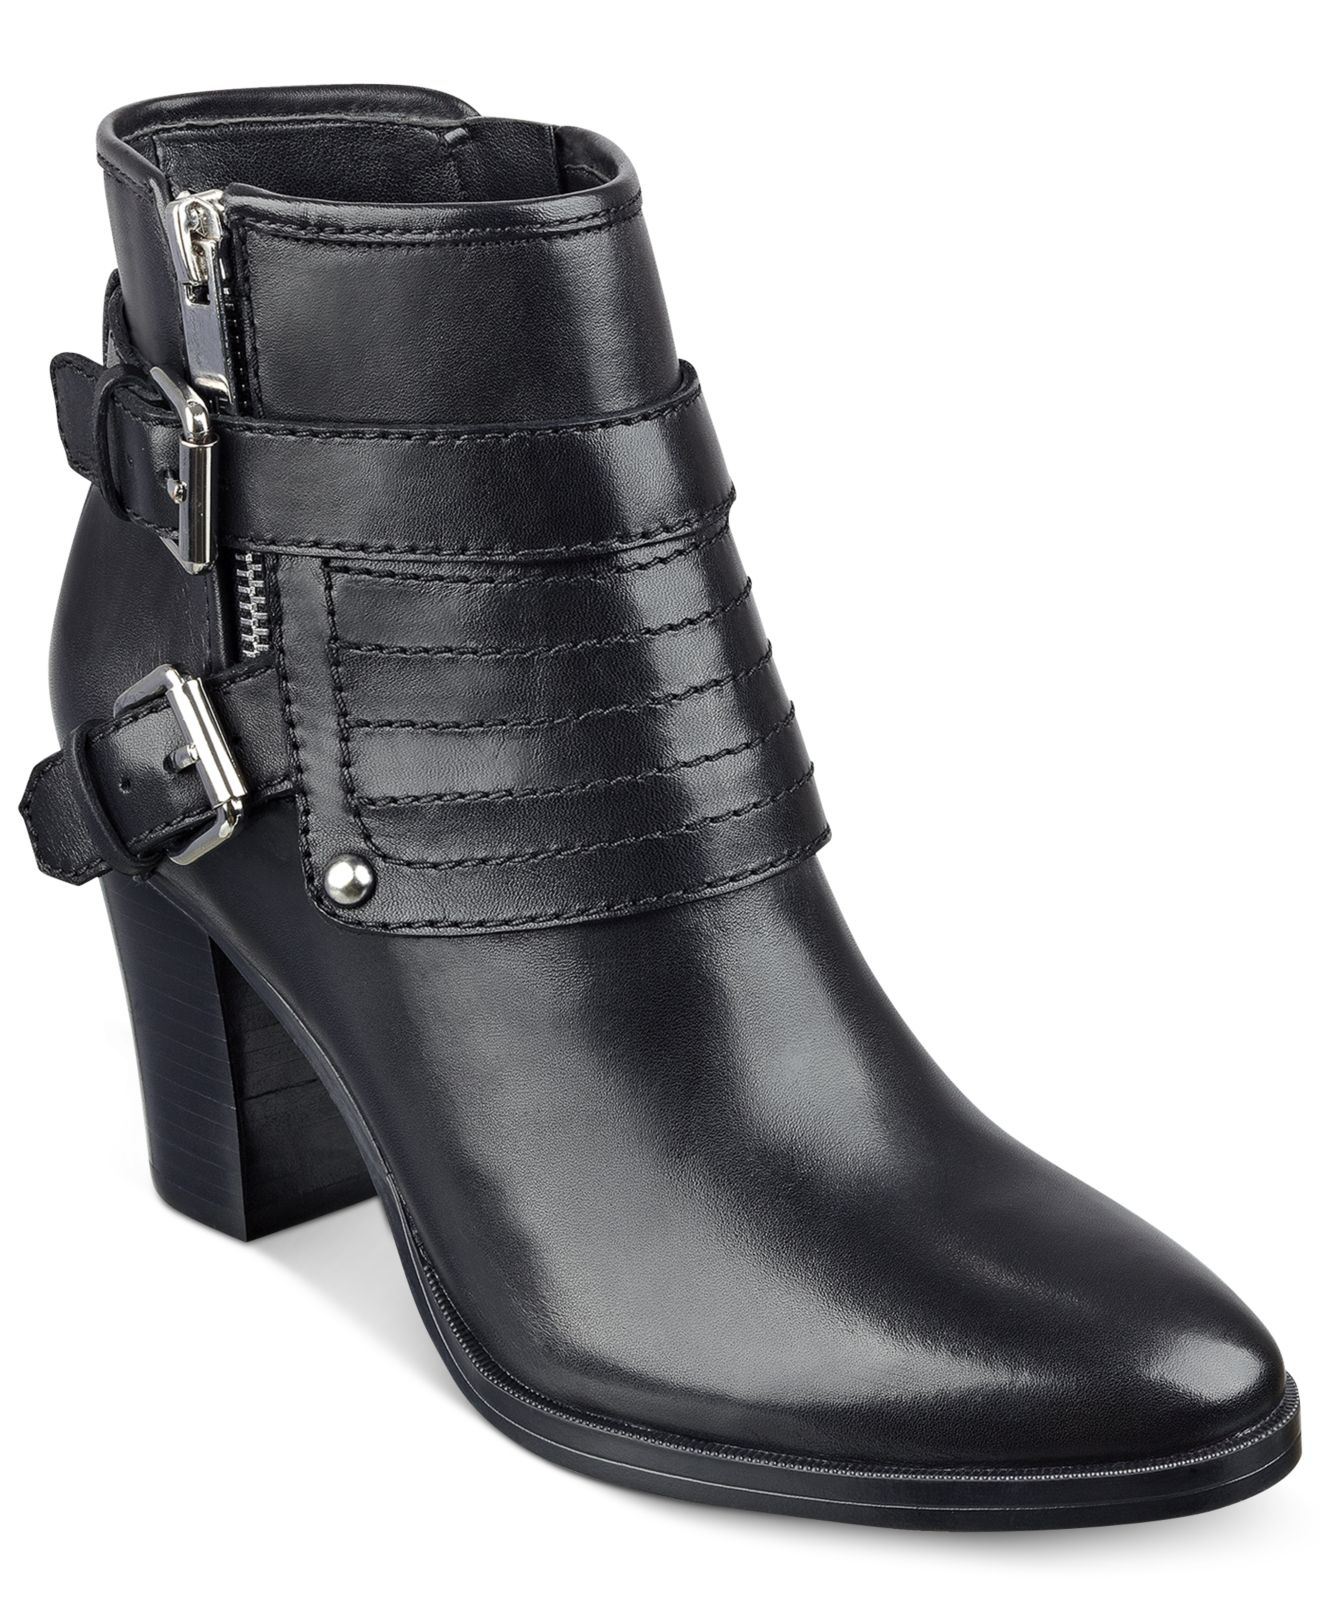 Marc fisher Engine Ankle Booties in Black | Lyst